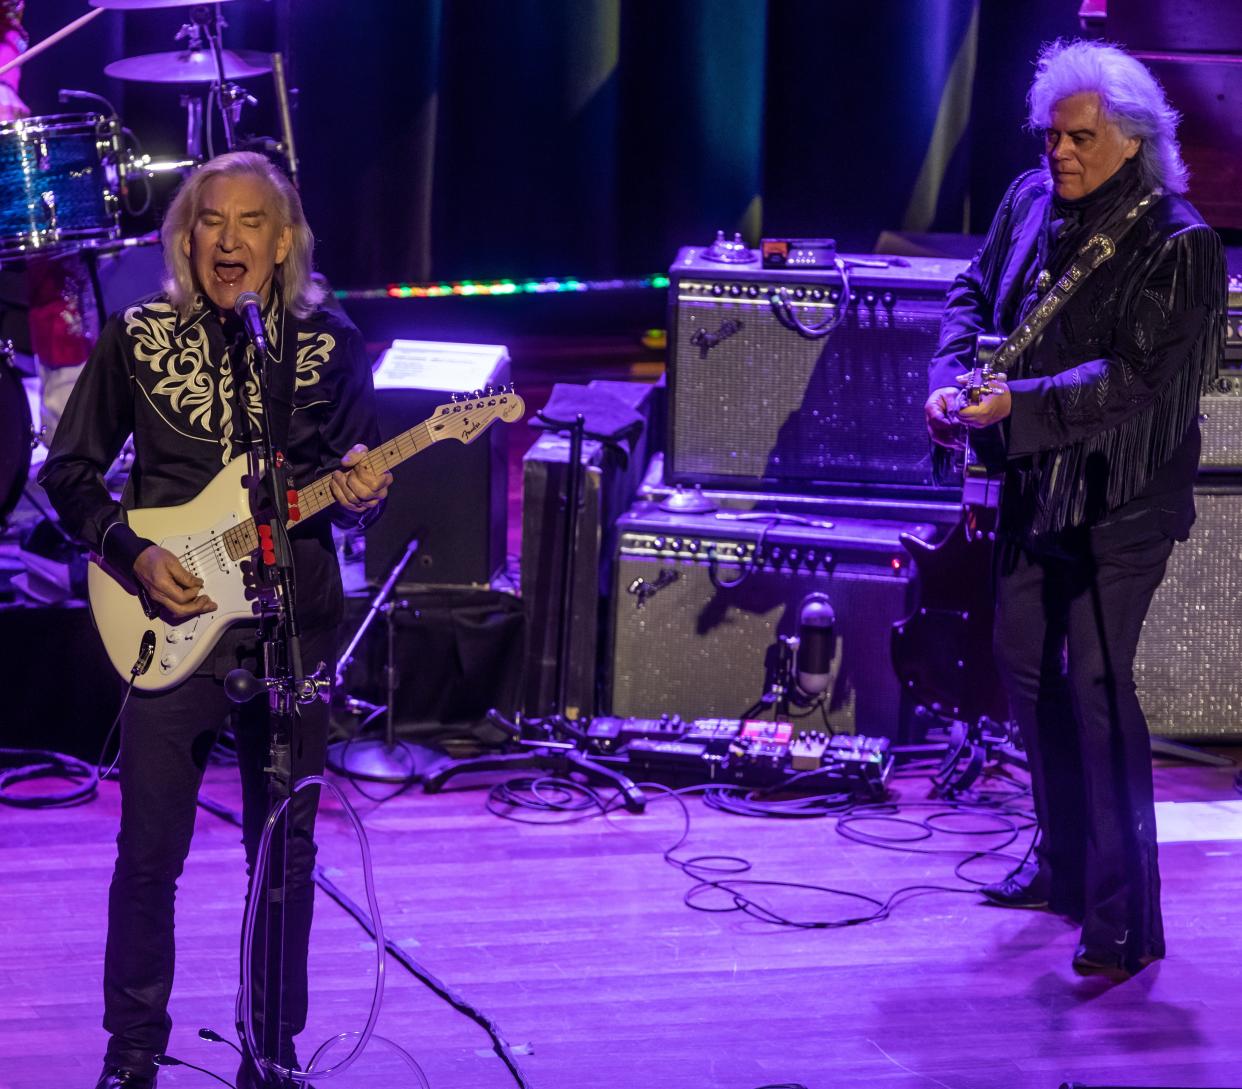 Joe Walsh performs during Marty Stuart's Late Night Jam Wednesday, June 7, 2023 at the Ryman Auditorium in Nashville, Tennessee.